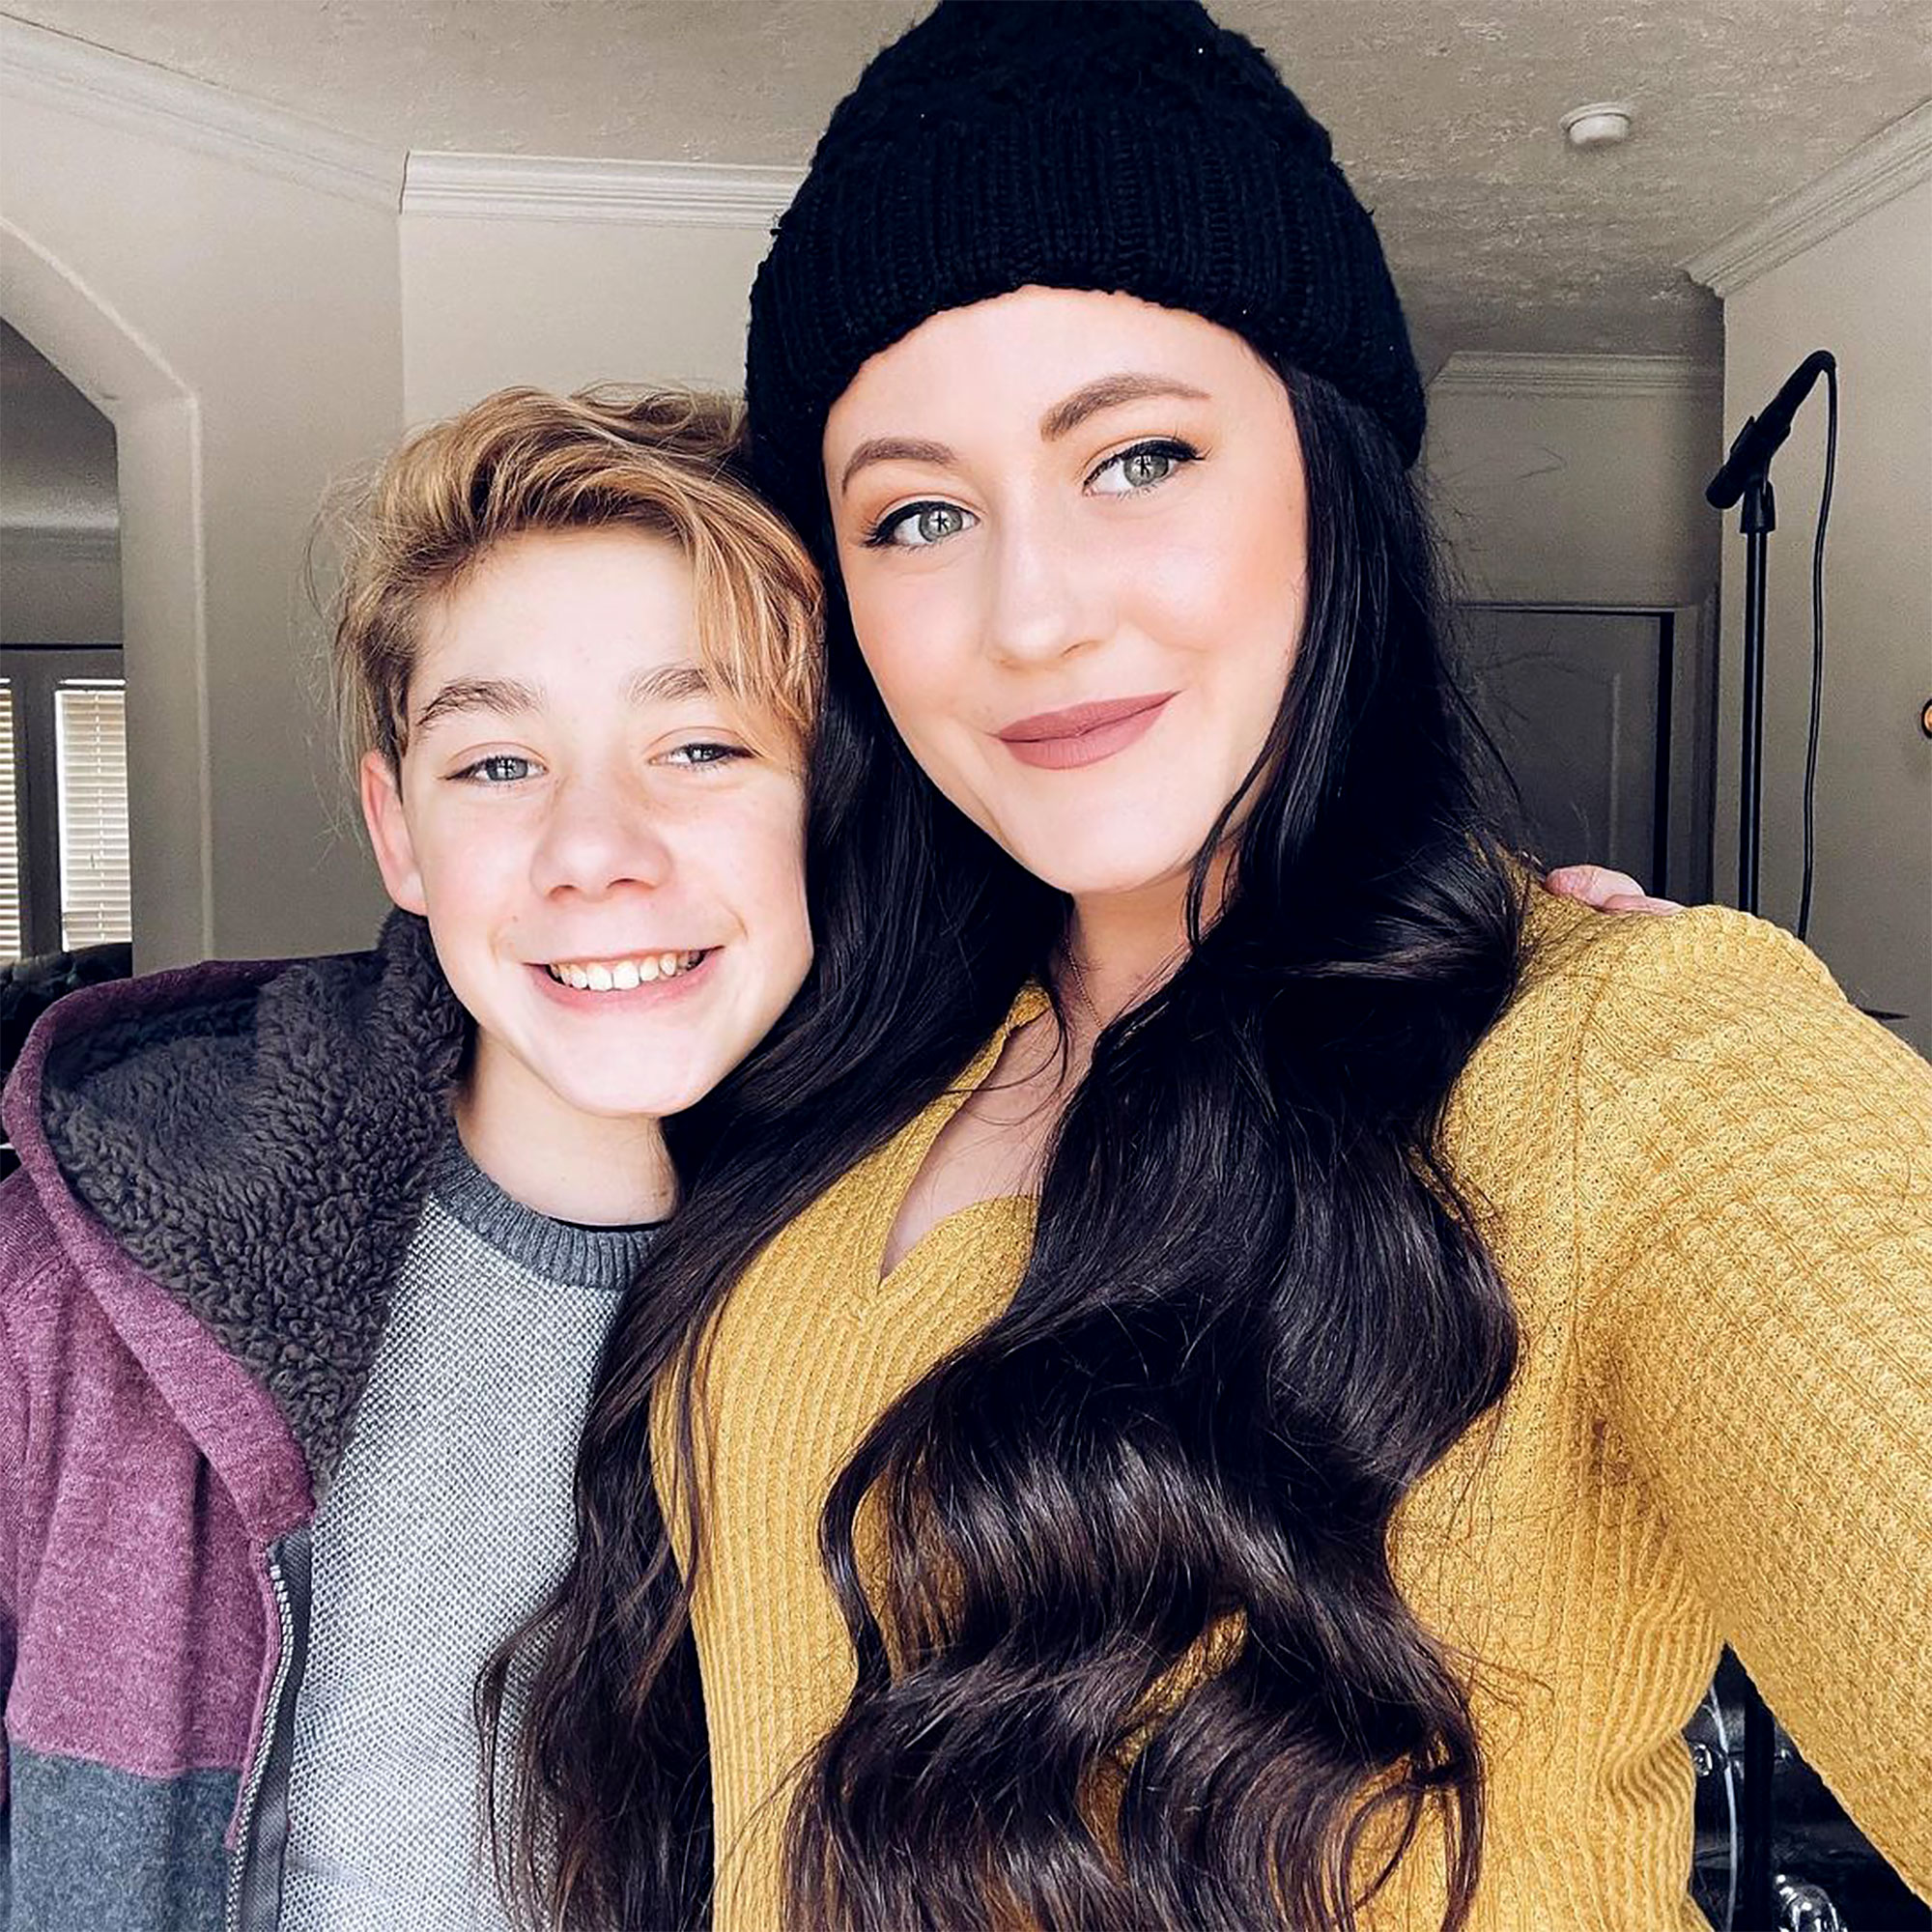 Teen Mom 2s Jenelle Evans Son Jace, 12, Looks Grown Up New Photos image